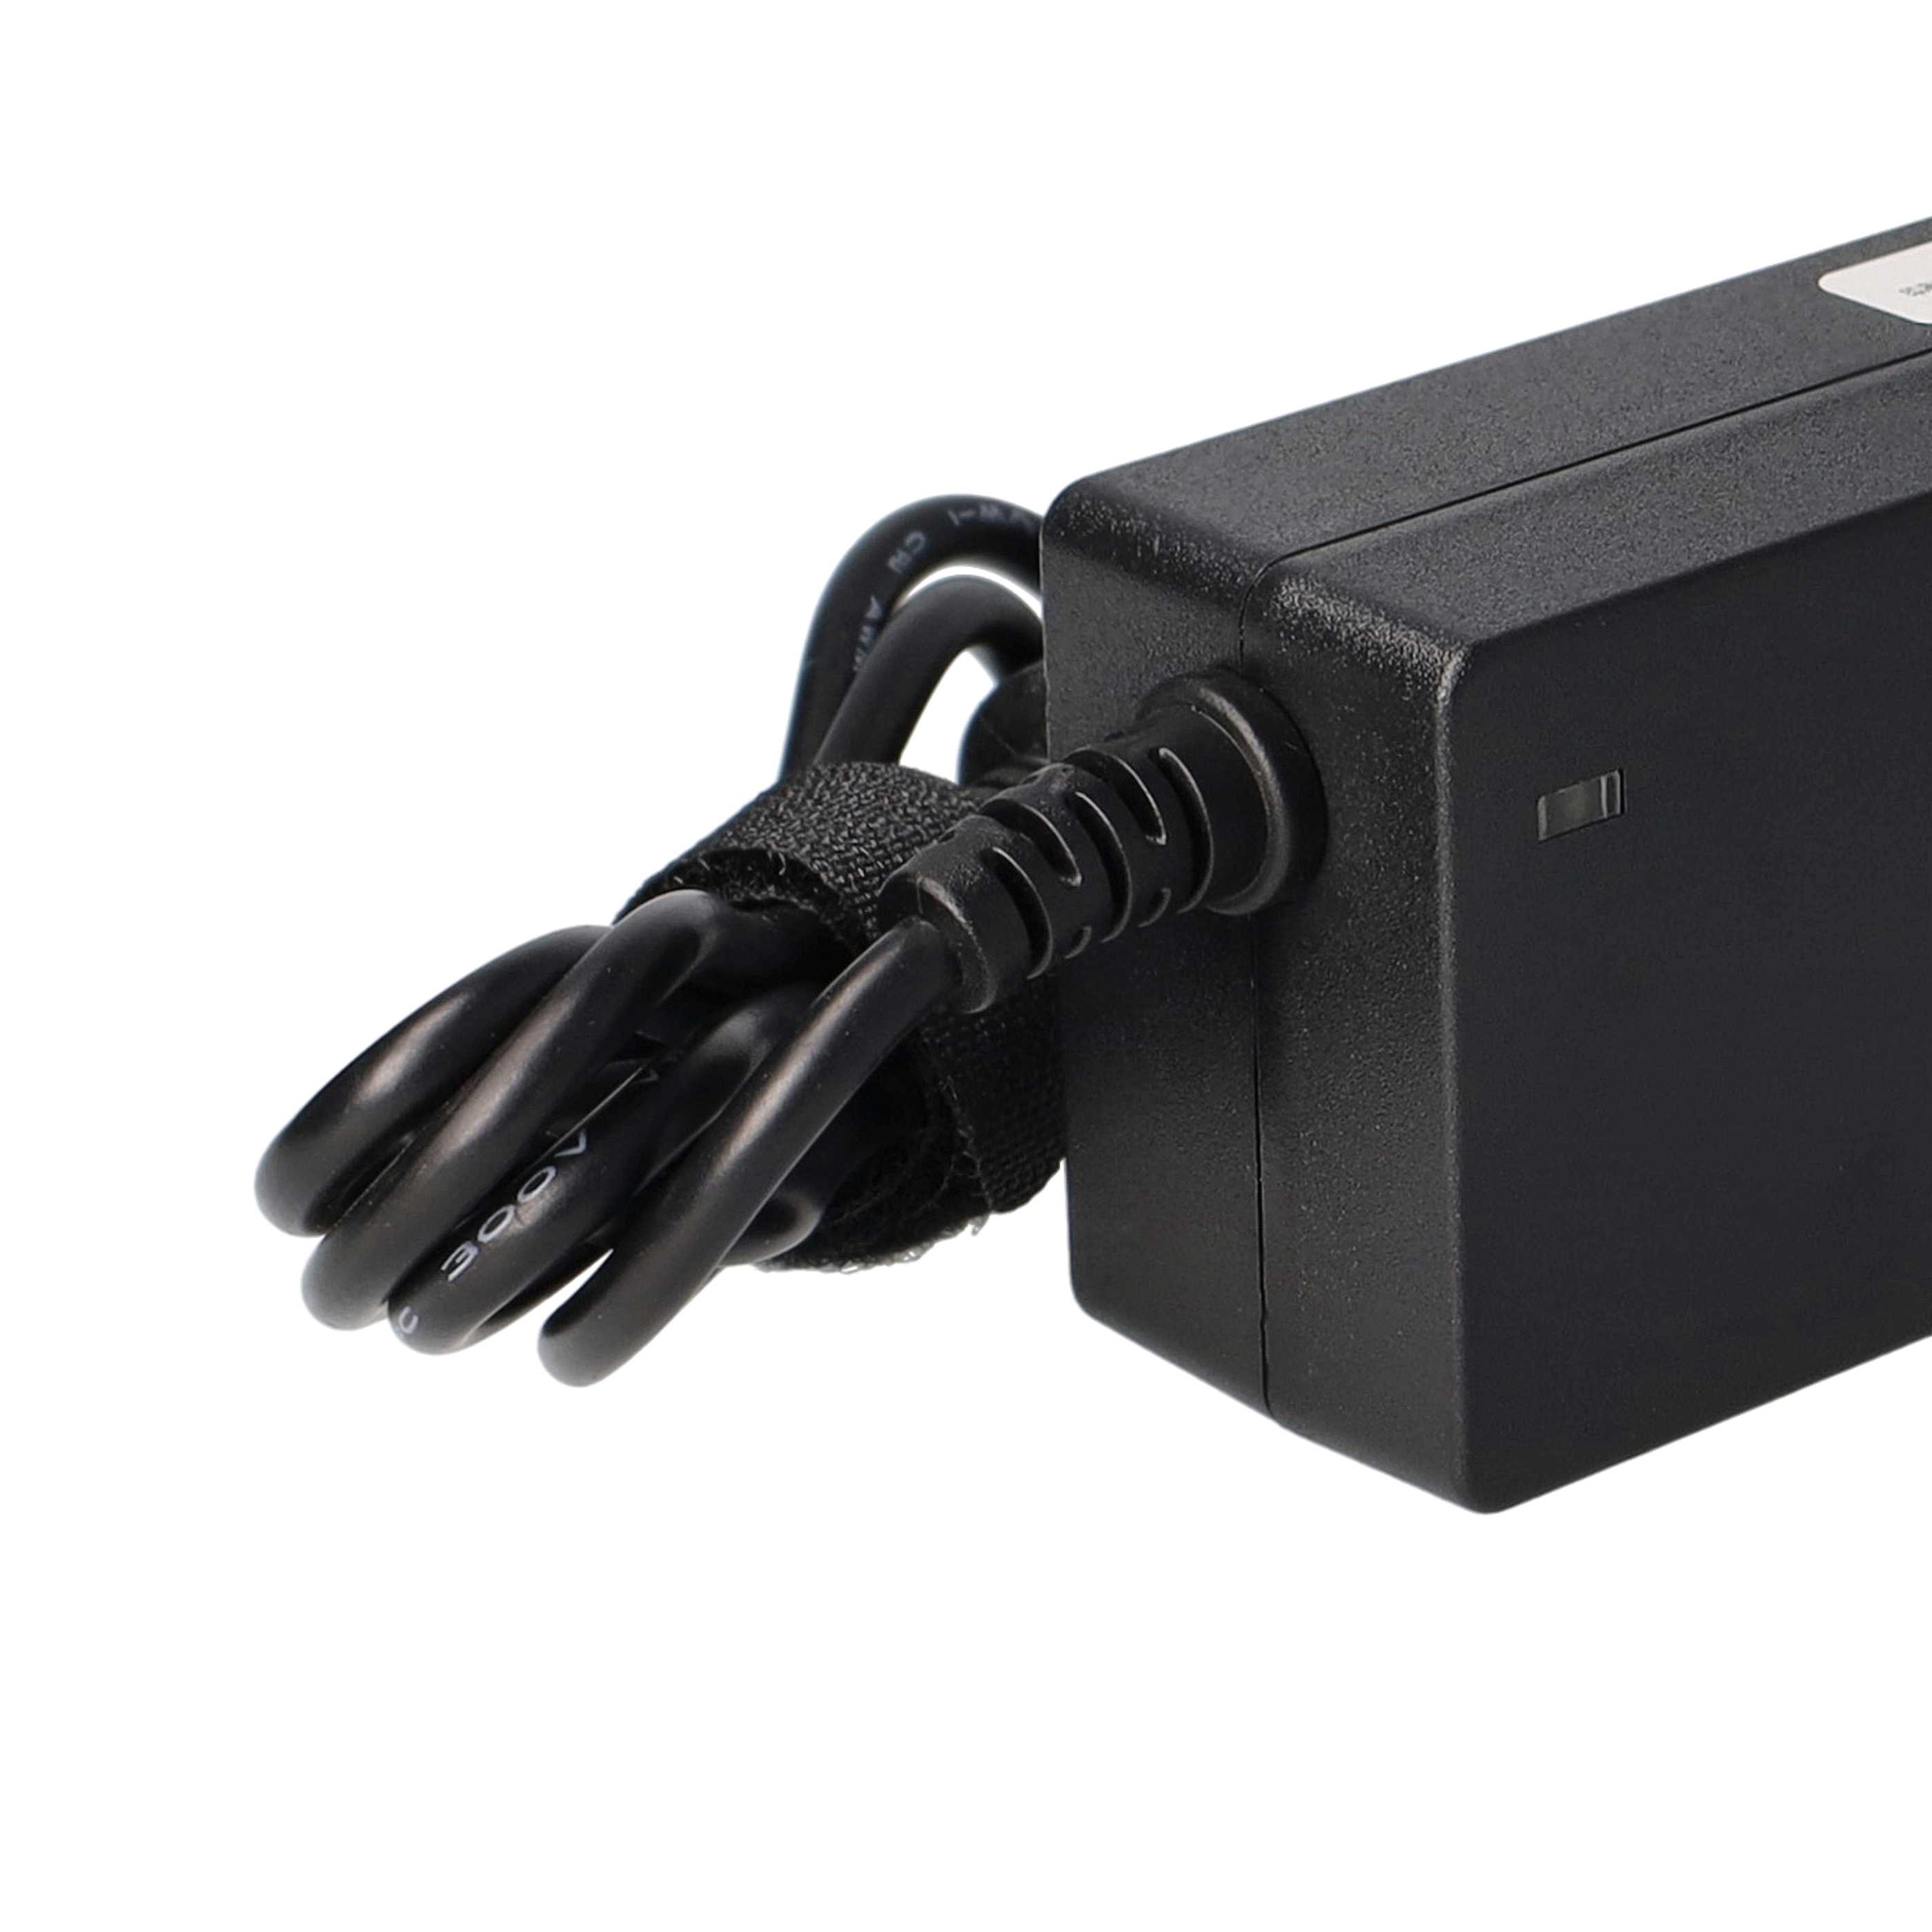 Mains Power Adapter replaces HP PP009C for HPNotebook etc., 65 W